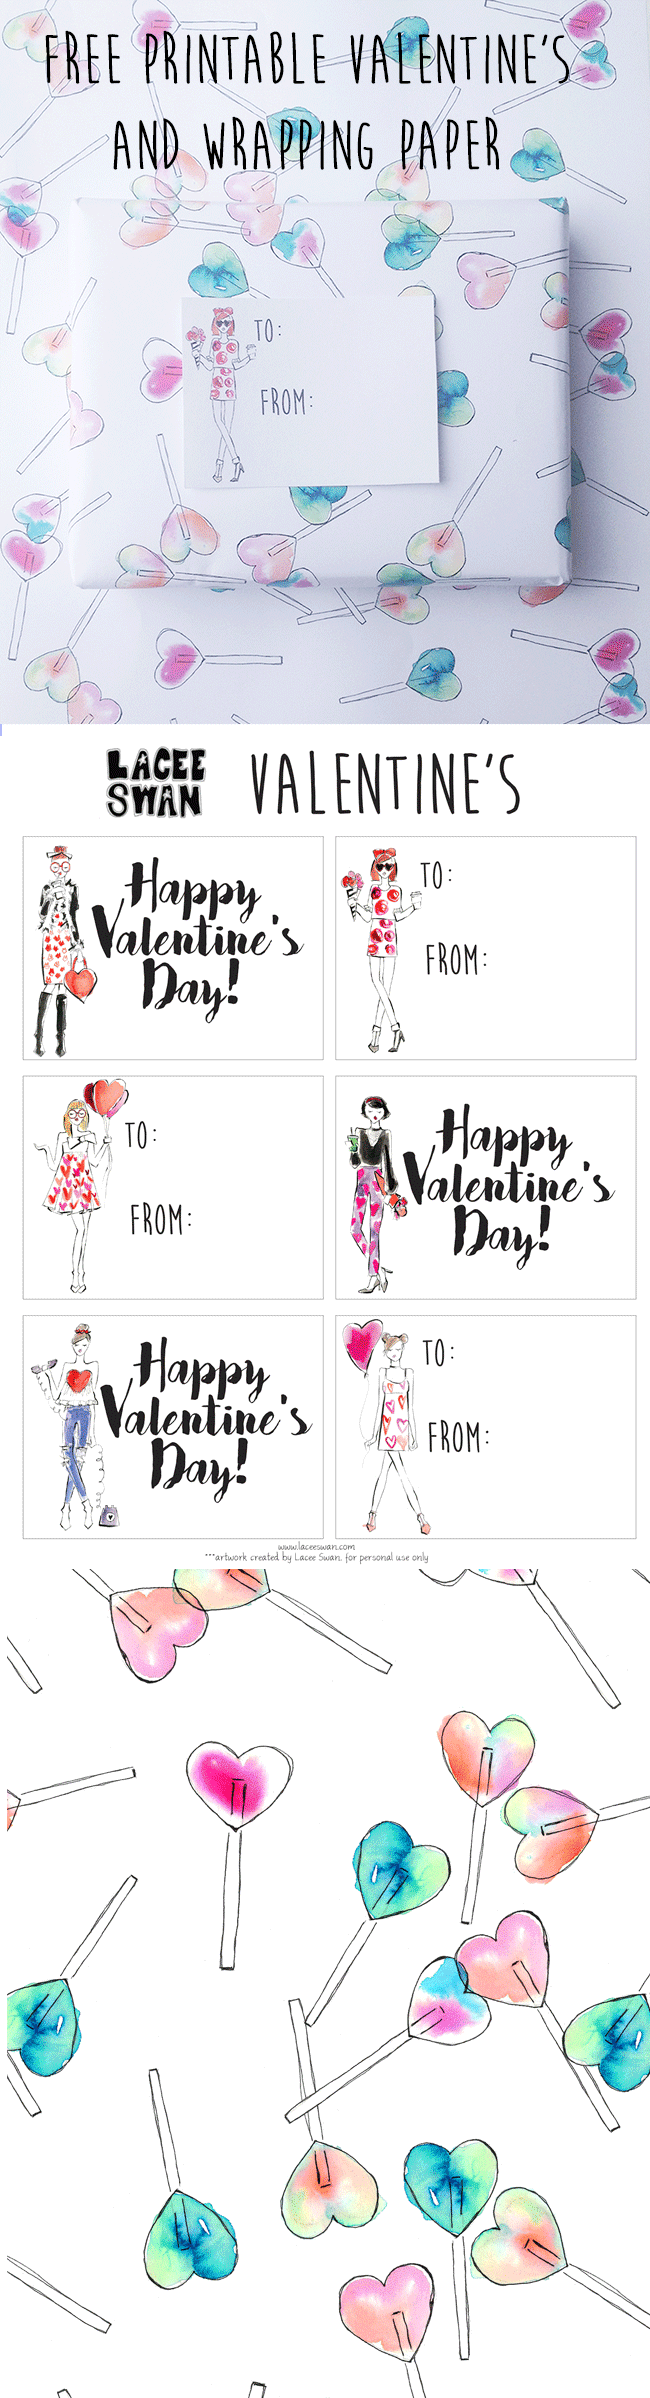 Free Printable Valentine s Wrapping Paper Lacee SwanLacee Swan